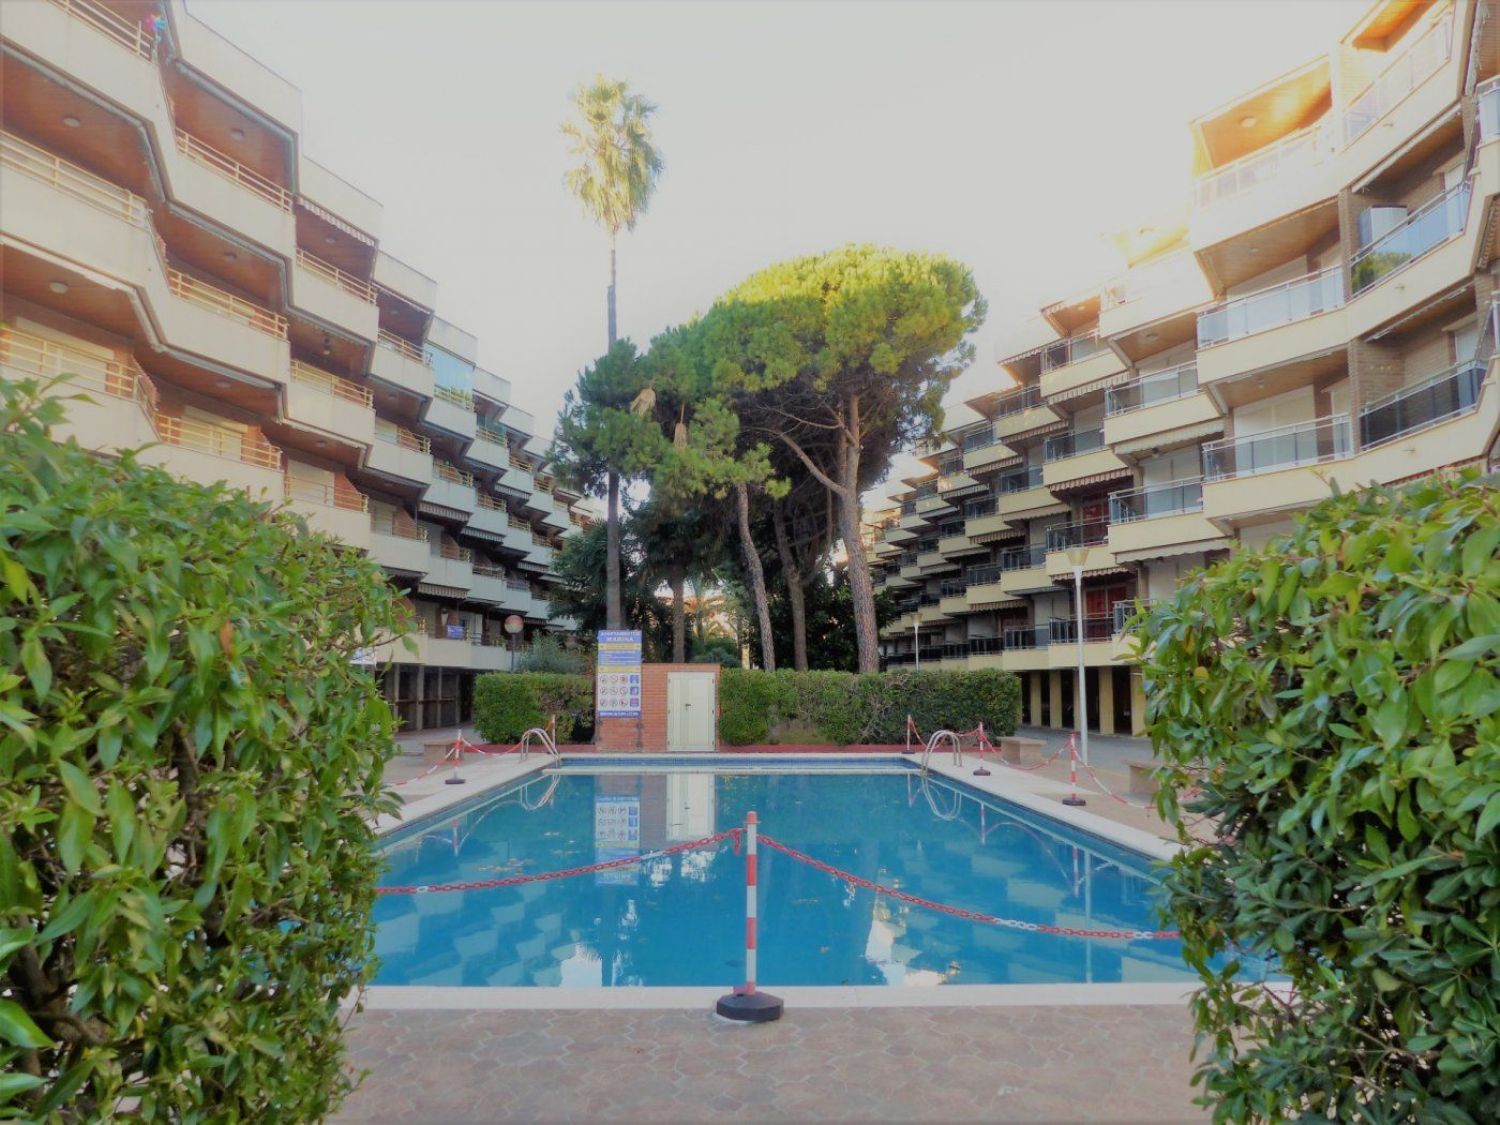 Apartment for sale on the seafront from La Diputació to Cambrils